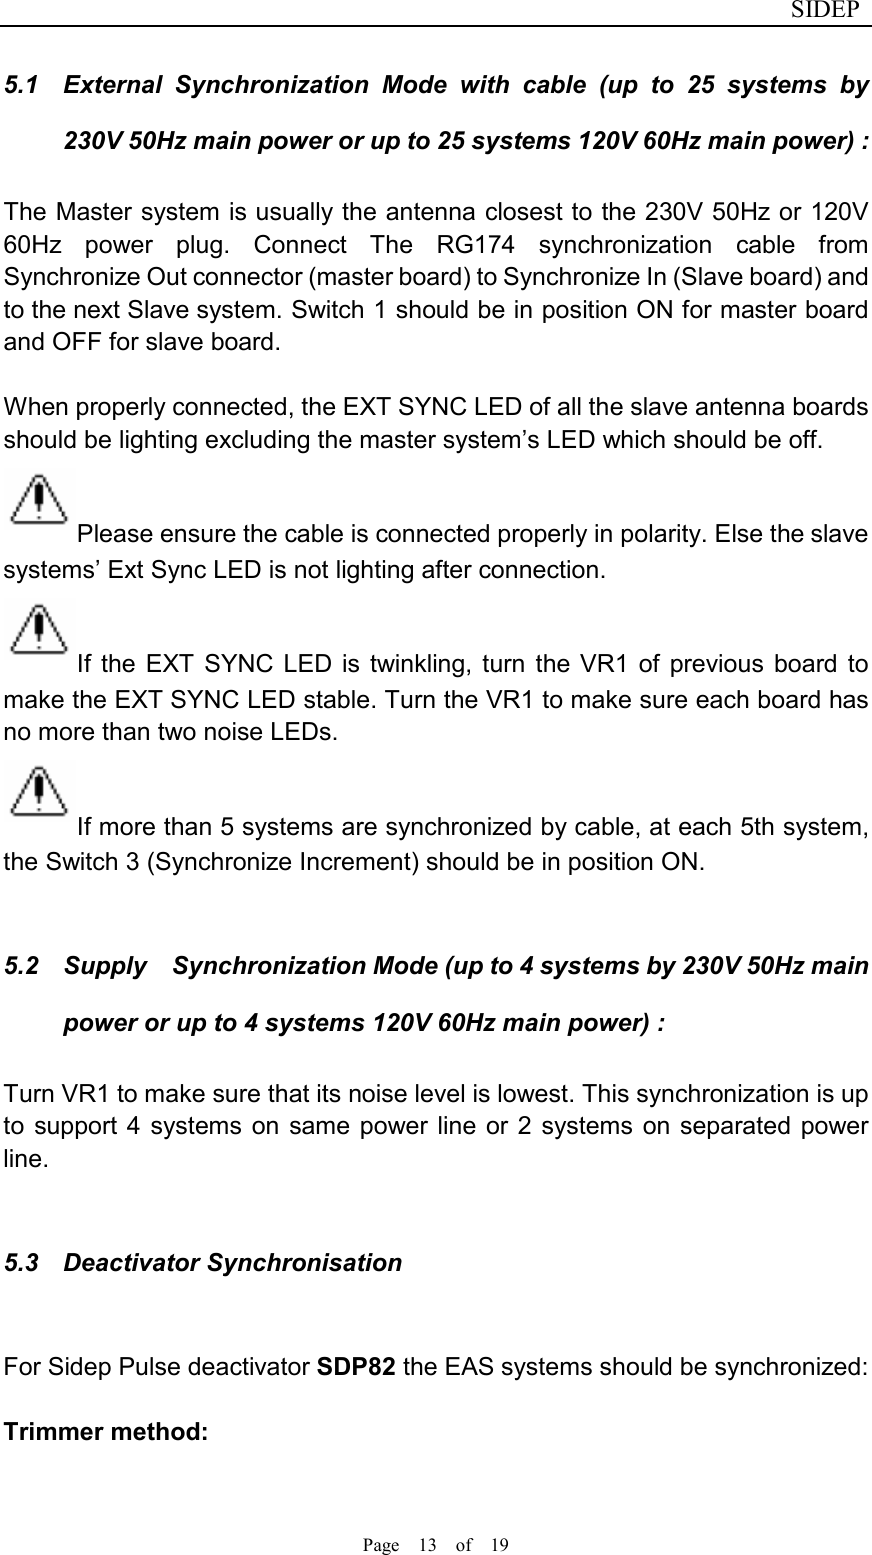                              SIDEP Page    13    of    19   5.1  External  Synchronization  Mode  with  cable  (up  to  25  systems  by 230V 50Hz main power or up to 25 systems 120V 60Hz main power) : The Master system is usually the antenna closest to the 230V 50Hz or 120V 60Hz  power  plug.  Connect  The  RG174  synchronization  cable  from Synchronize Out connector (master board) to Synchronize In (Slave board) and to the next Slave system. Switch 1 should be in position ON for master board and OFF for slave board.  When properly connected, the EXT SYNC LED of all the slave antenna boards should be lighting excluding the master system’s LED which should be off.   Please ensure the cable is connected properly in polarity. Else the slave systems’ Ext Sync LED is not lighting after connection. If  the  EXT SYNC  LED  is  twinkling,  turn  the  VR1  of  previous  board  to make the EXT SYNC LED stable. Turn the VR1 to make sure each board has no more than two noise LEDs. If more than 5 systems are synchronized by cable, at each 5th system, the Switch 3 (Synchronize Increment) should be in position ON.  5.2  Supply    Synchronization Mode (up to 4 systems by 230V 50Hz main power or up to 4 systems 120V 60Hz main power) : Turn VR1 to make sure that its noise level is lowest. This synchronization is up to  support 4 systems on  same power line or 2  systems on separated power line.  5.3  Deactivator Synchronisation    For Sidep Pulse deactivator SDP82 the EAS systems should be synchronized:  Trimmer method:     